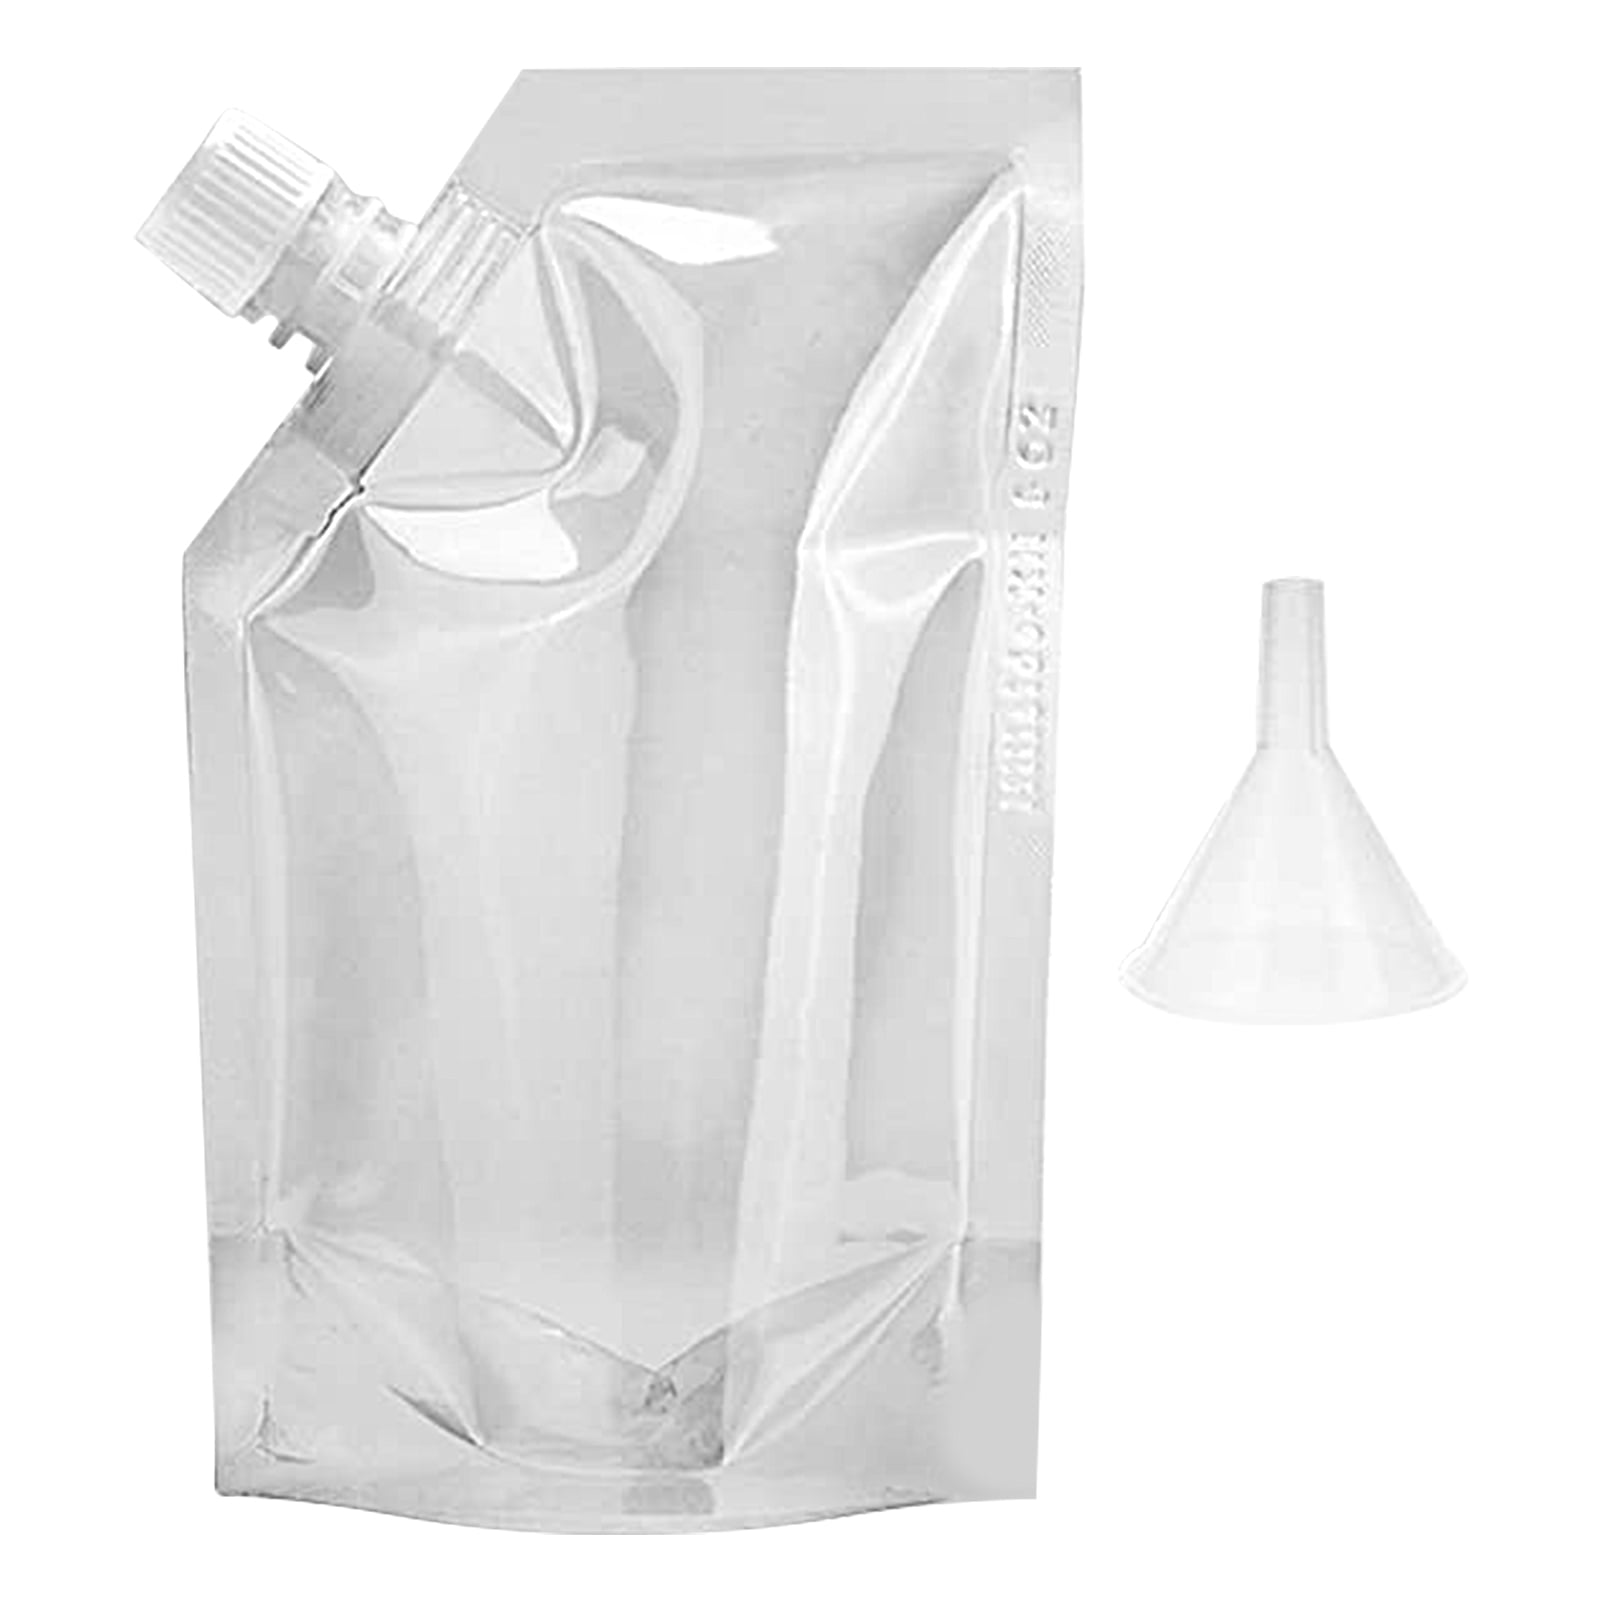 Shenmeida 10 Pcs Plastic Flasks Reusable Liquor Drink Juice Pouches with  Spout Concealable Drinking Flasks Bags Adults Sneak Alcohol Water Bottle  with Funnel 